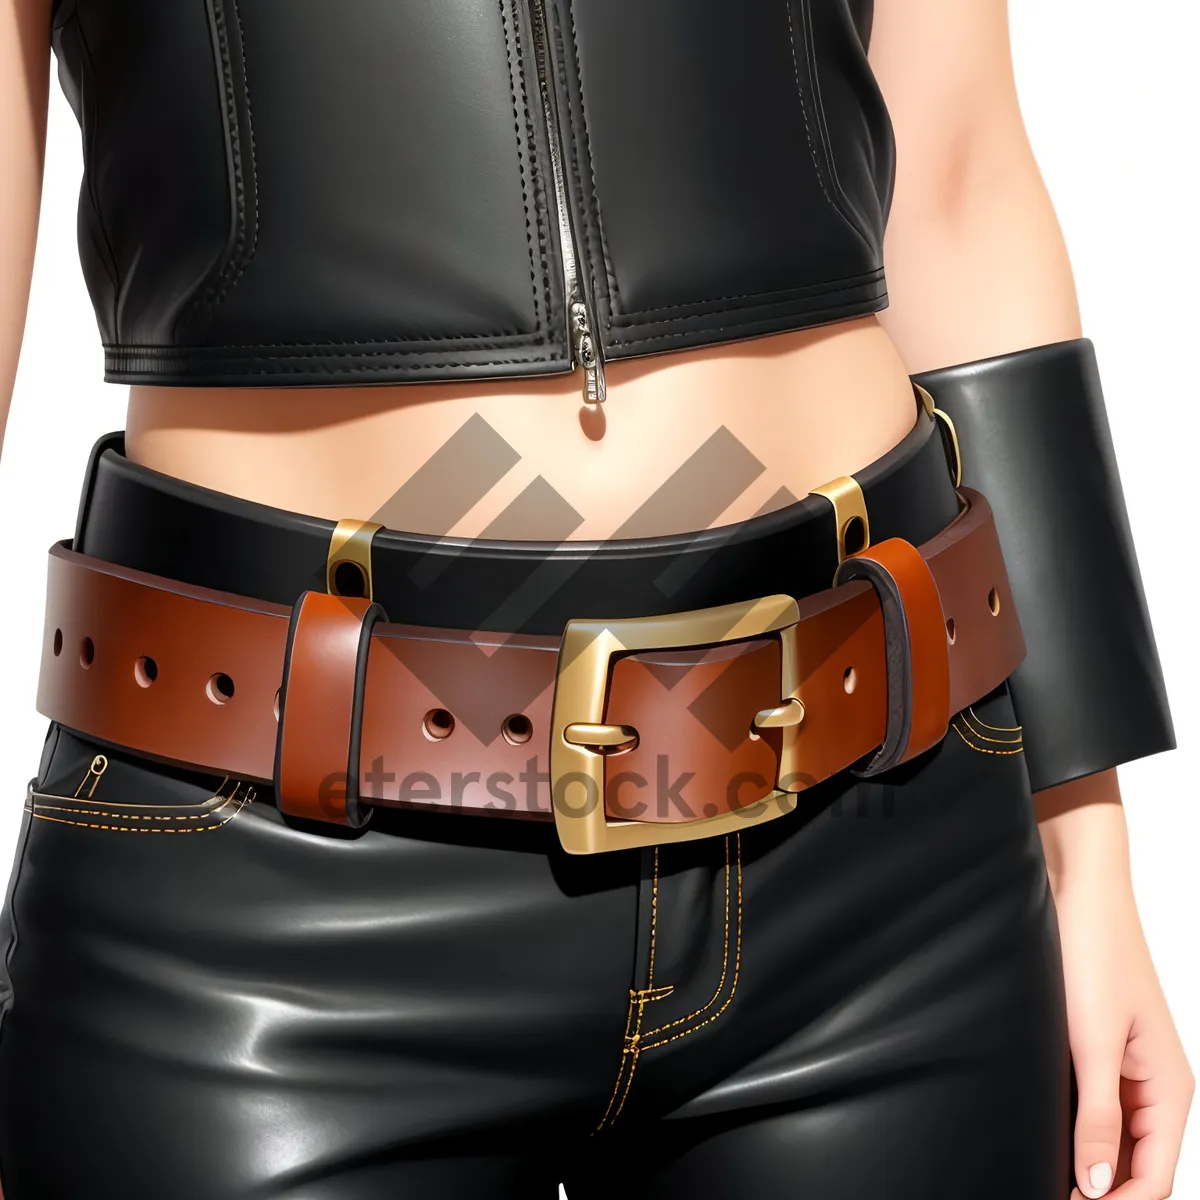 Picture of Stylish Leather Miniskirt: Fashionably Fit and Sexy